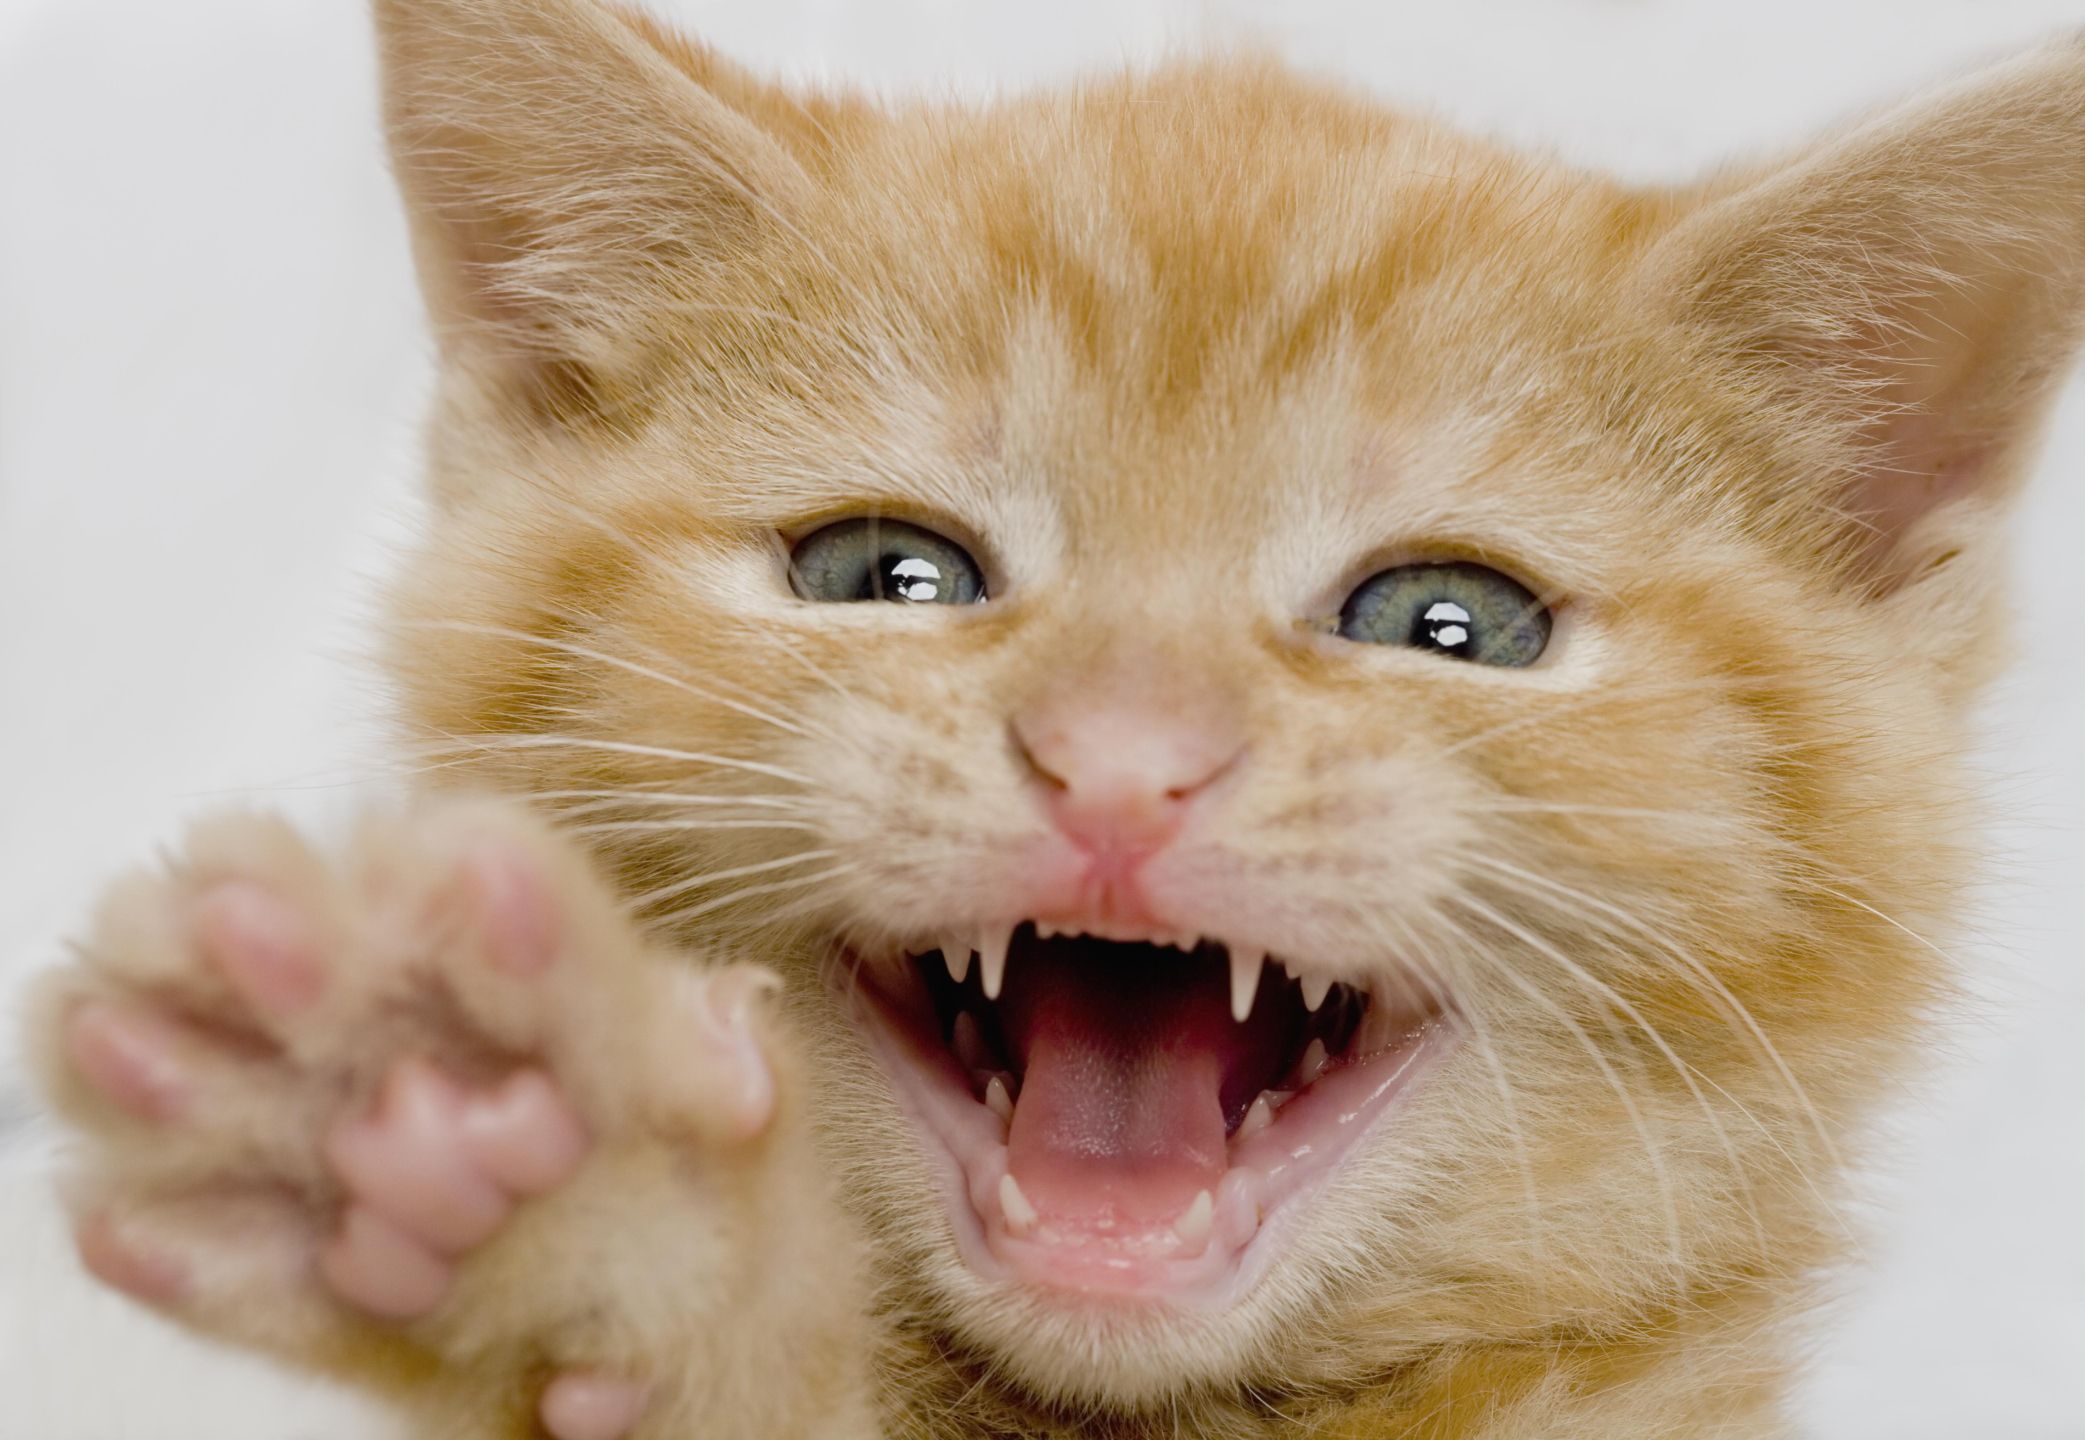 When Do Puppies and Kittens Lose Their Baby Teeth?